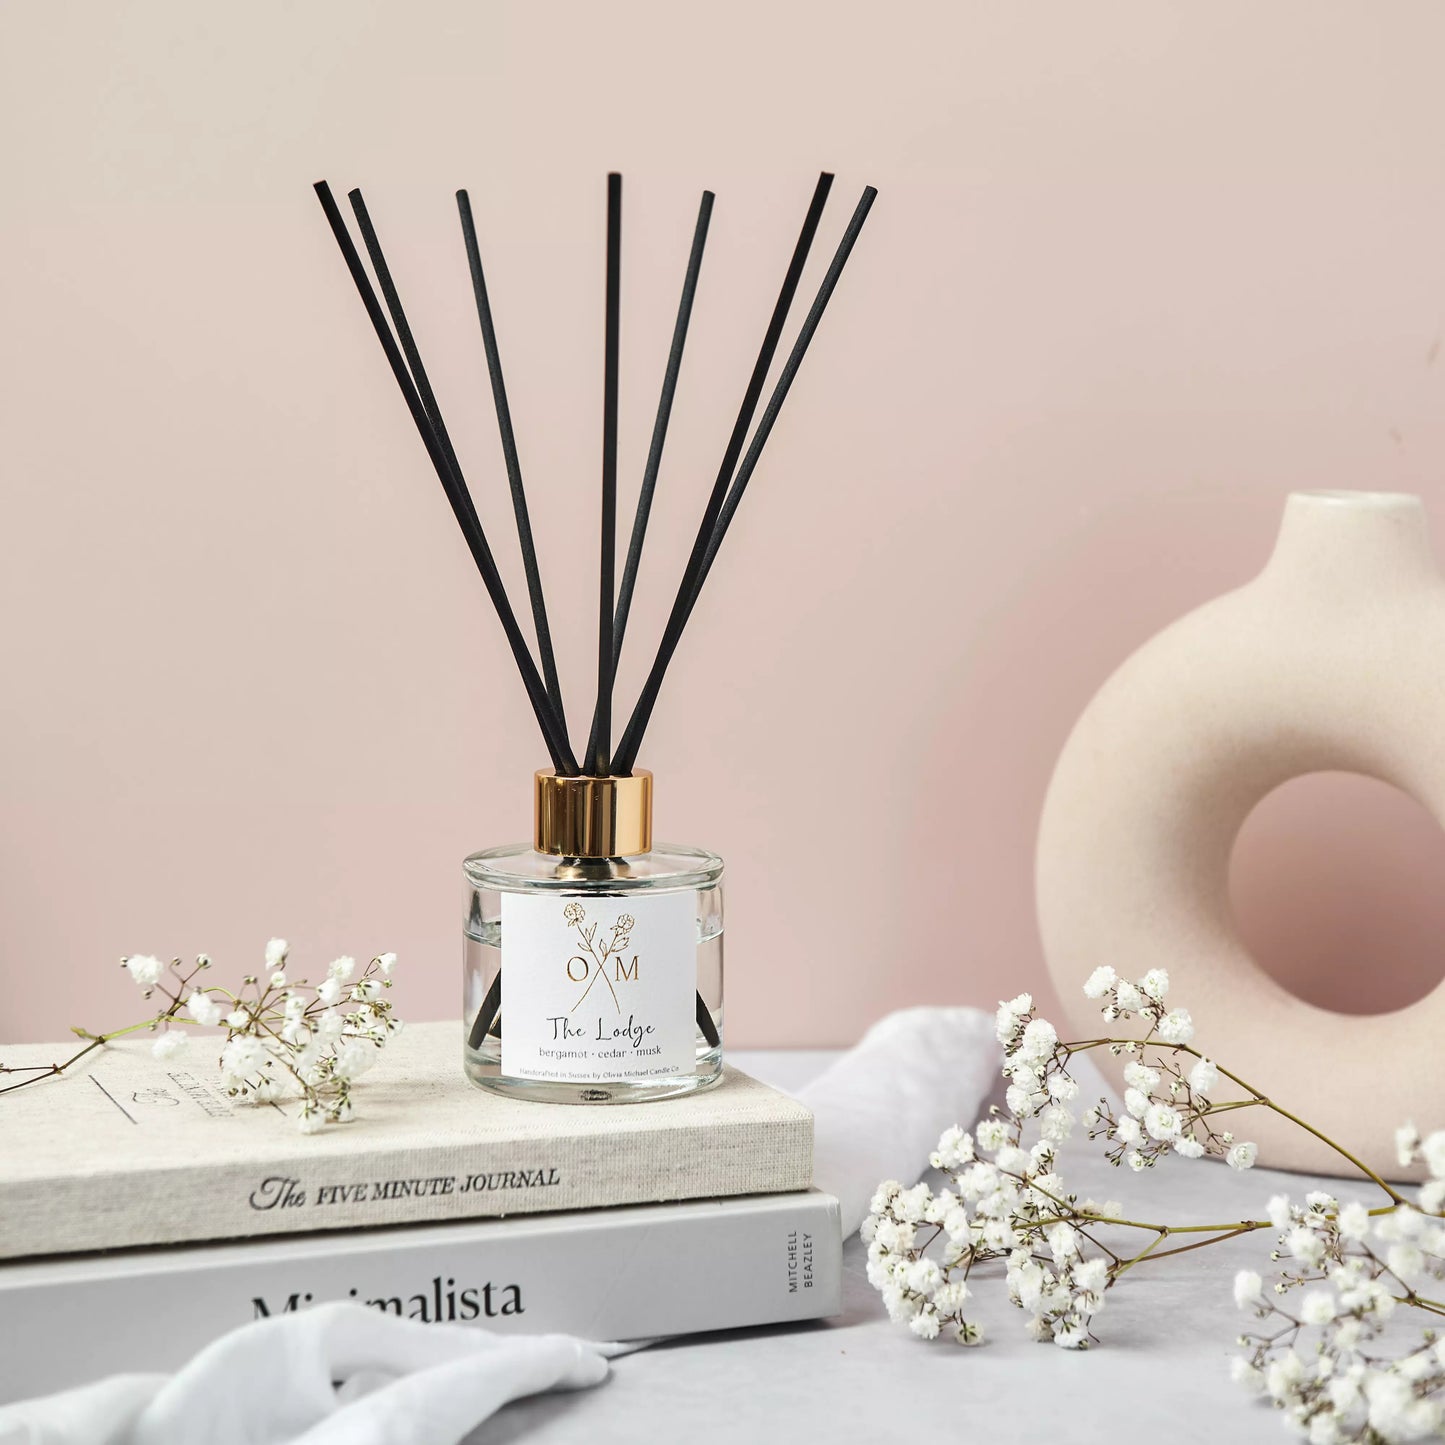 Our bergamot and cedar diffuser is on display in a clear glass jar.